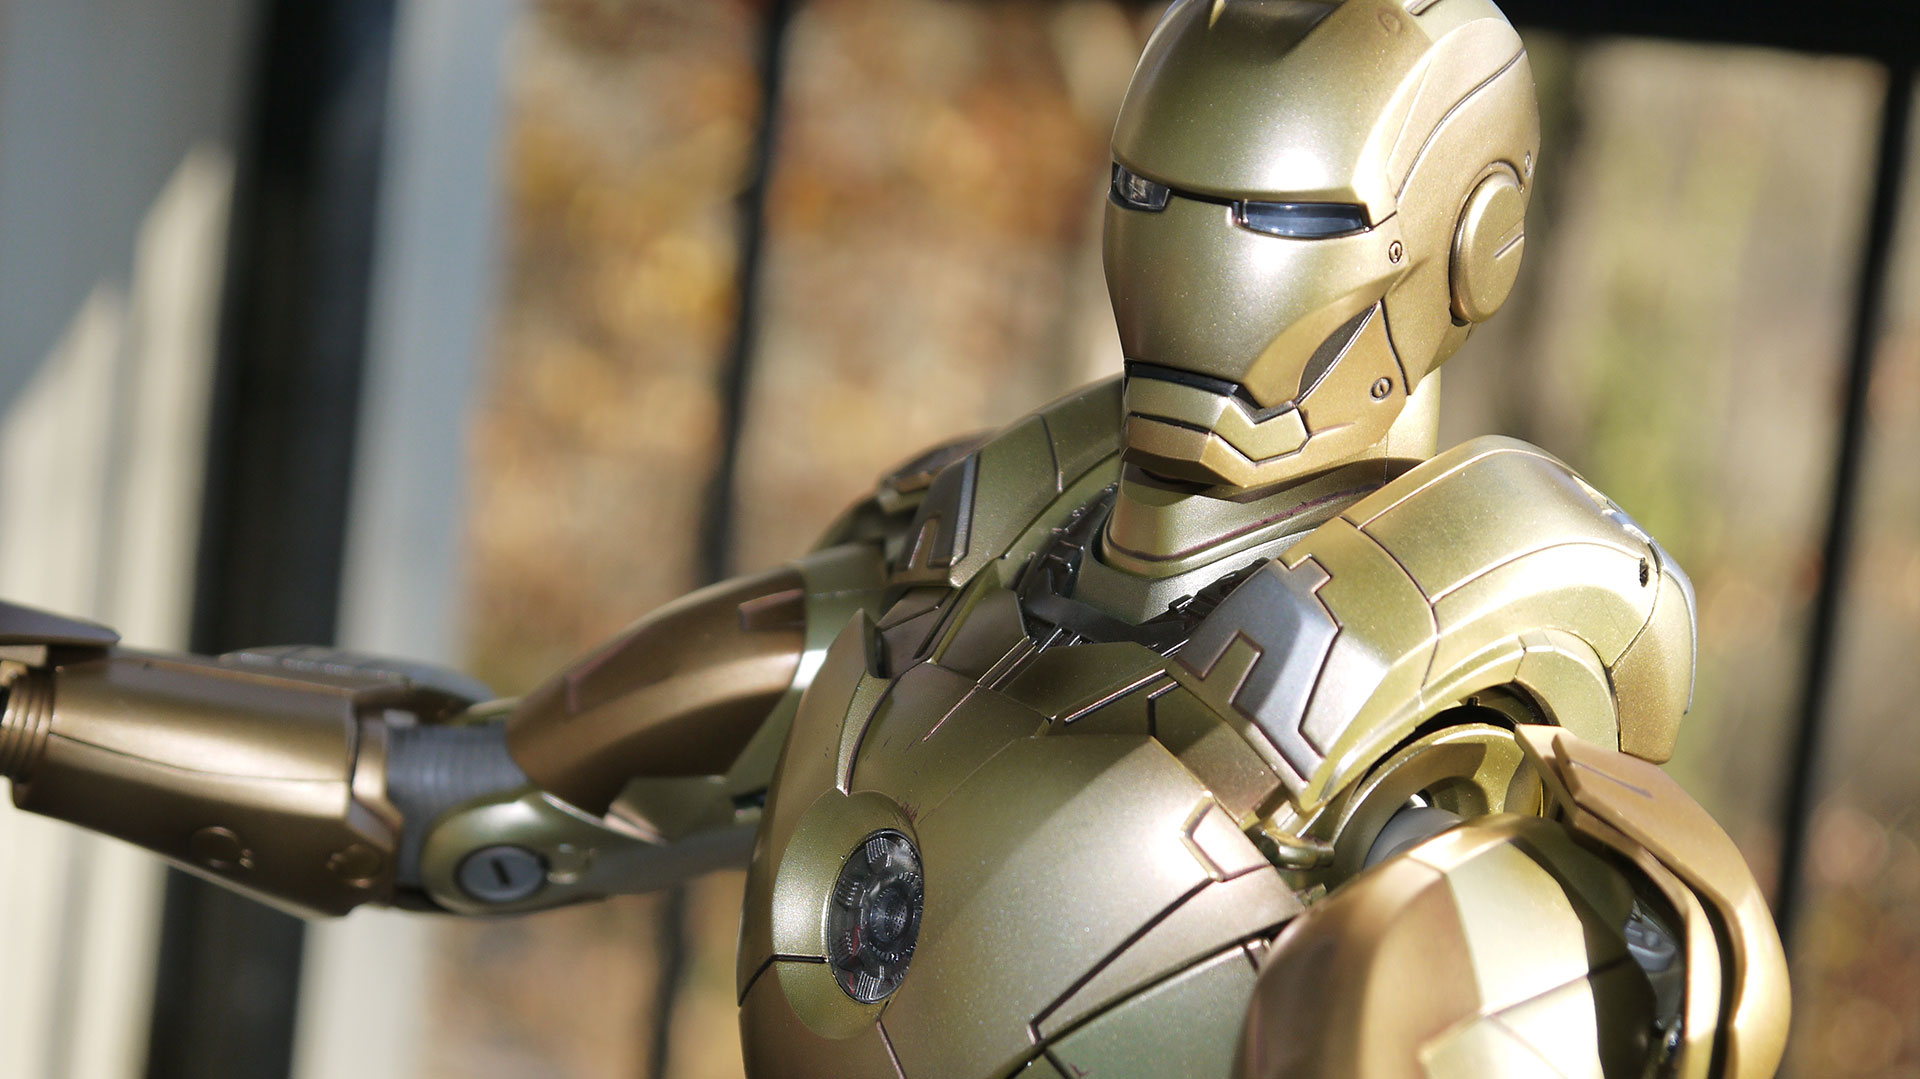 An Iron Man Figure Worth Its Weight In Gold